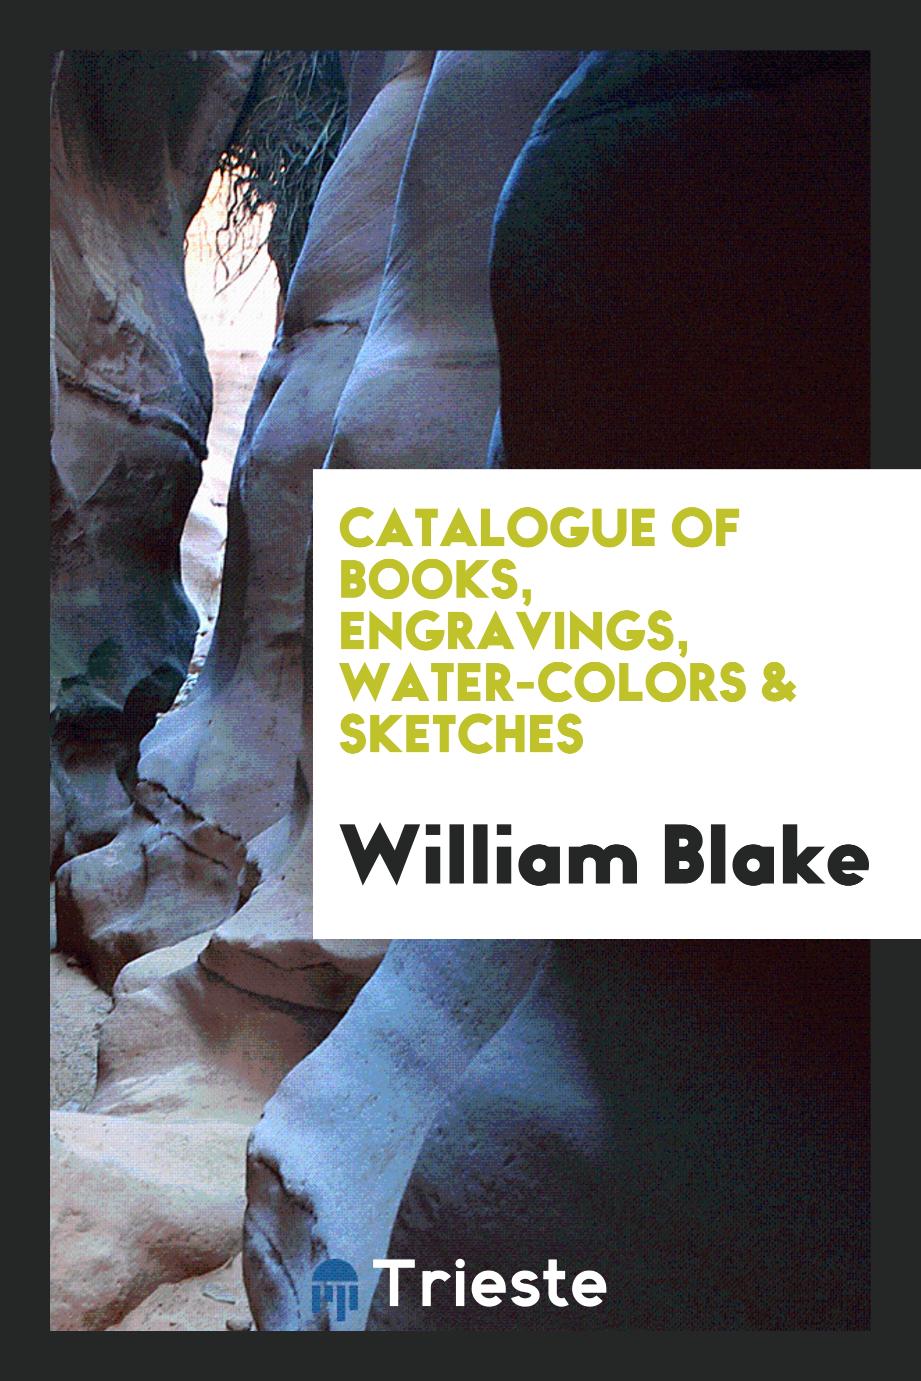 Catalogue of Books, Engravings, Water-Colors & Sketches